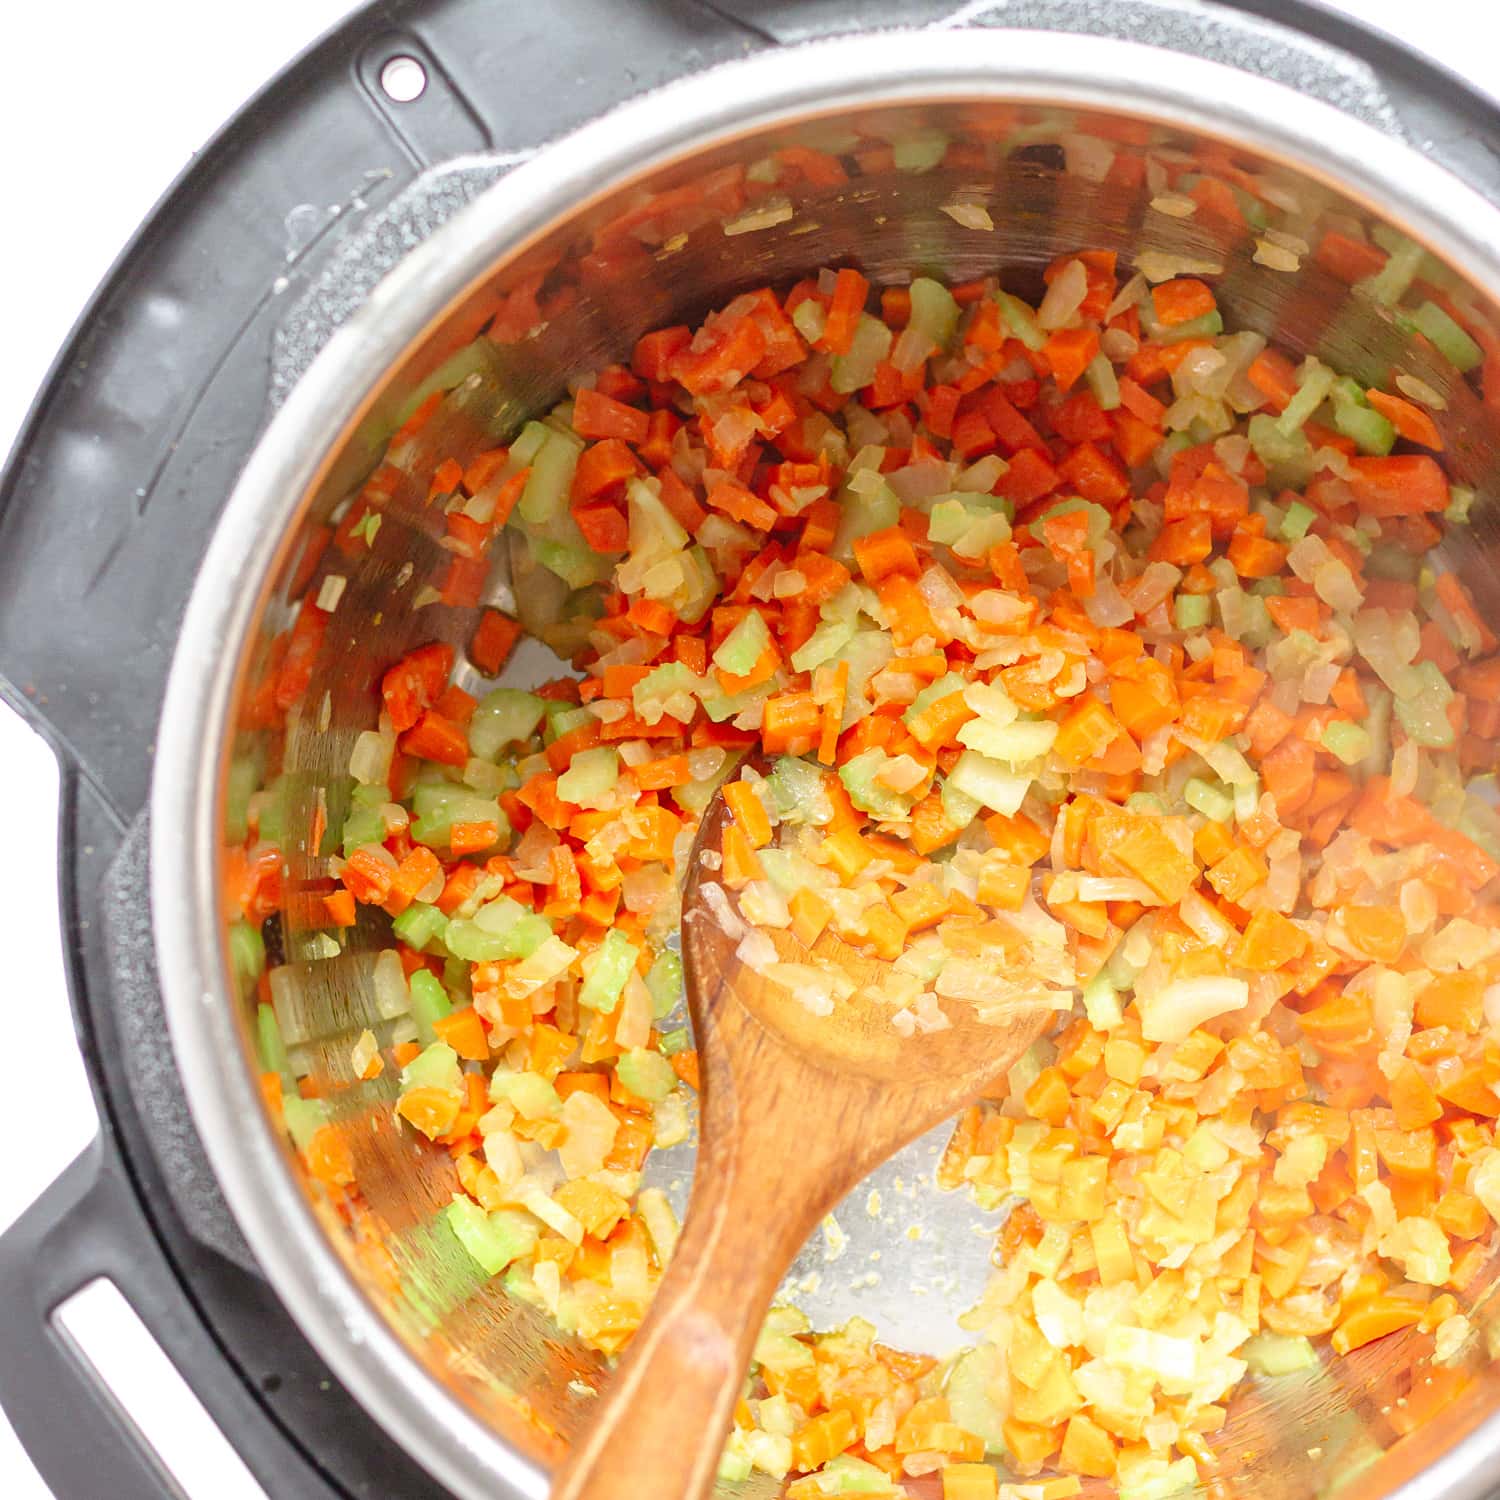 Chopped onions, celery, carrots and garlic being sautéed in an Instant Pot.